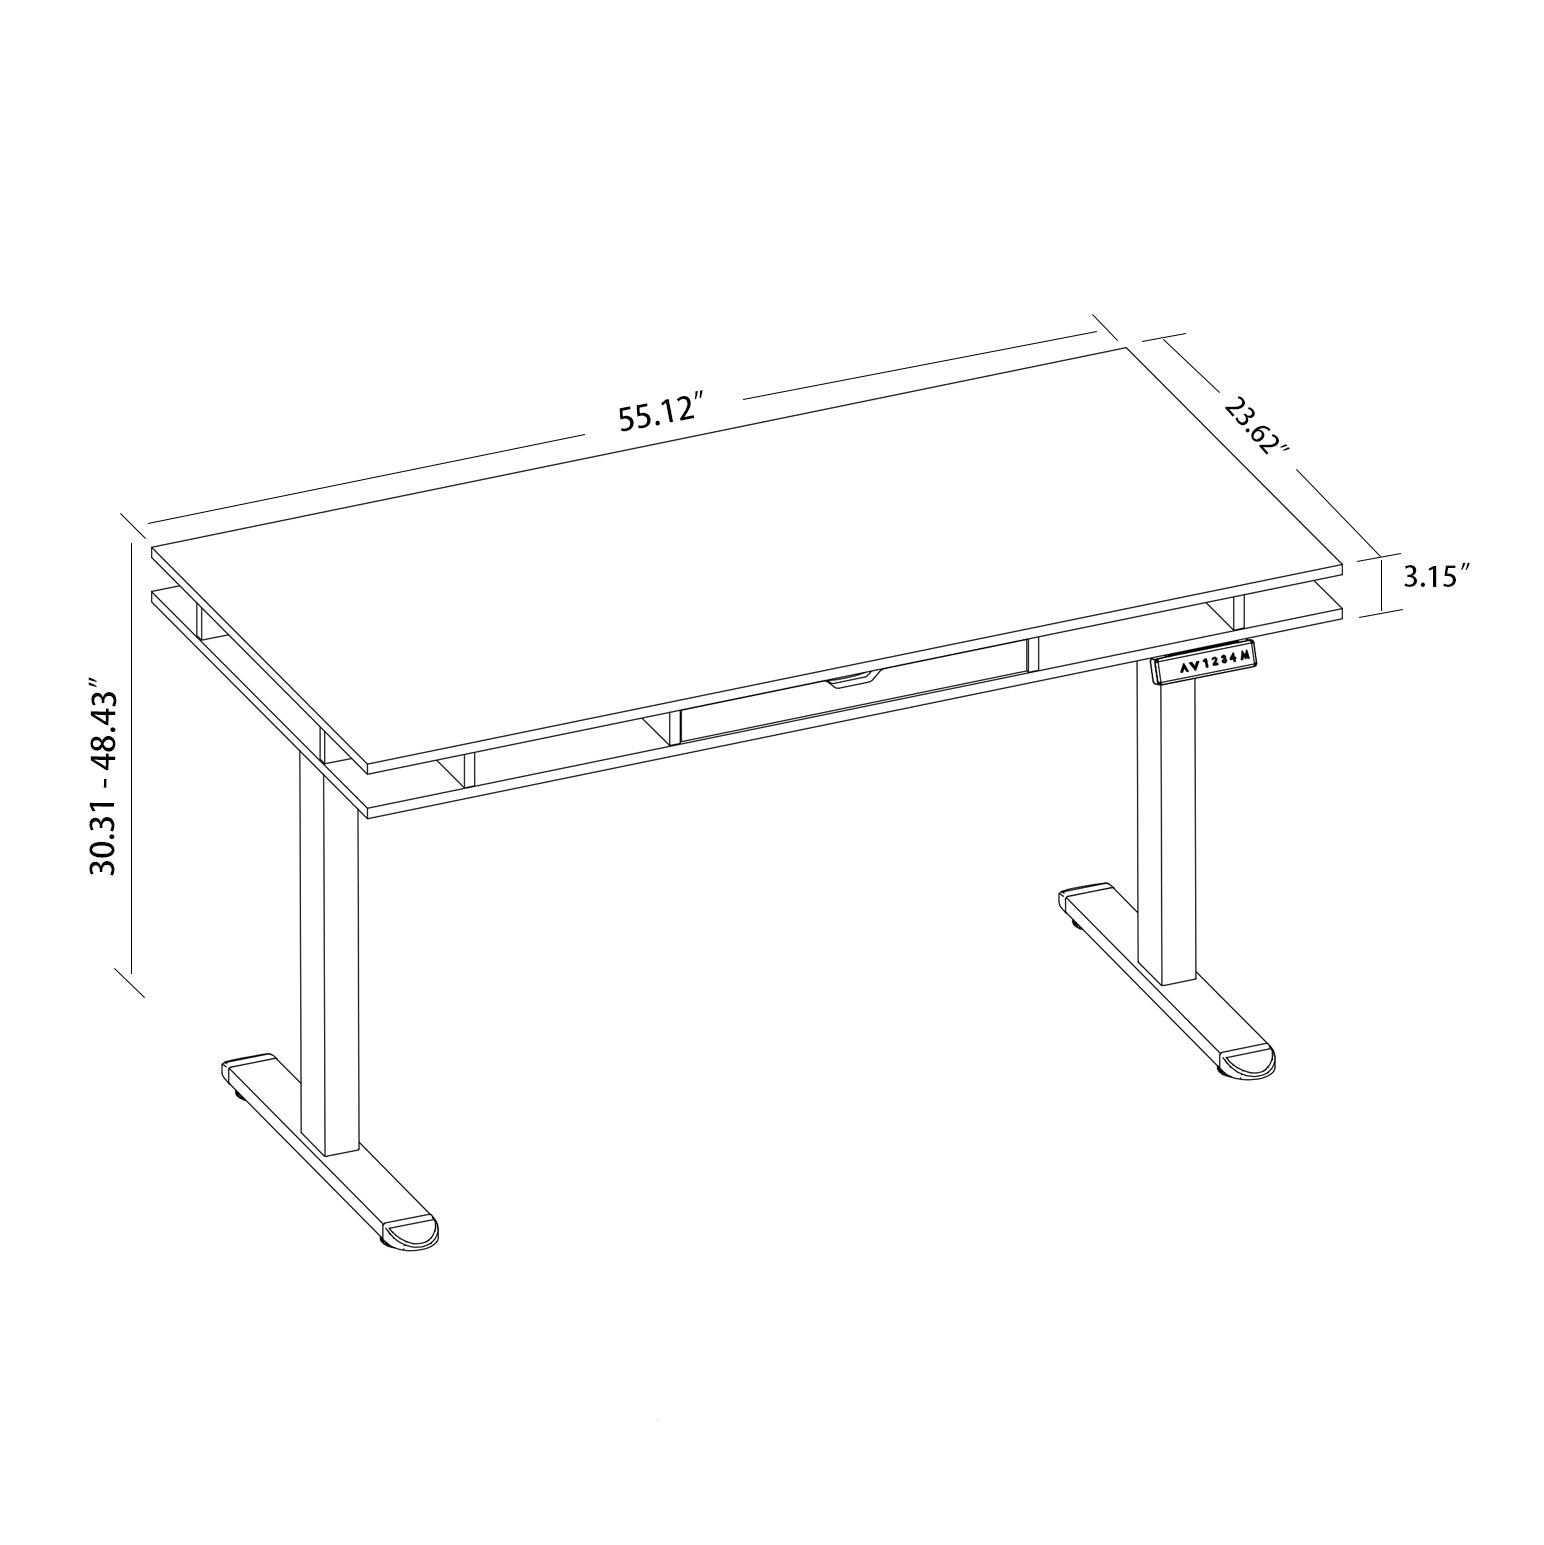 Tobacco Wood Lift table, Electrical Adjustable